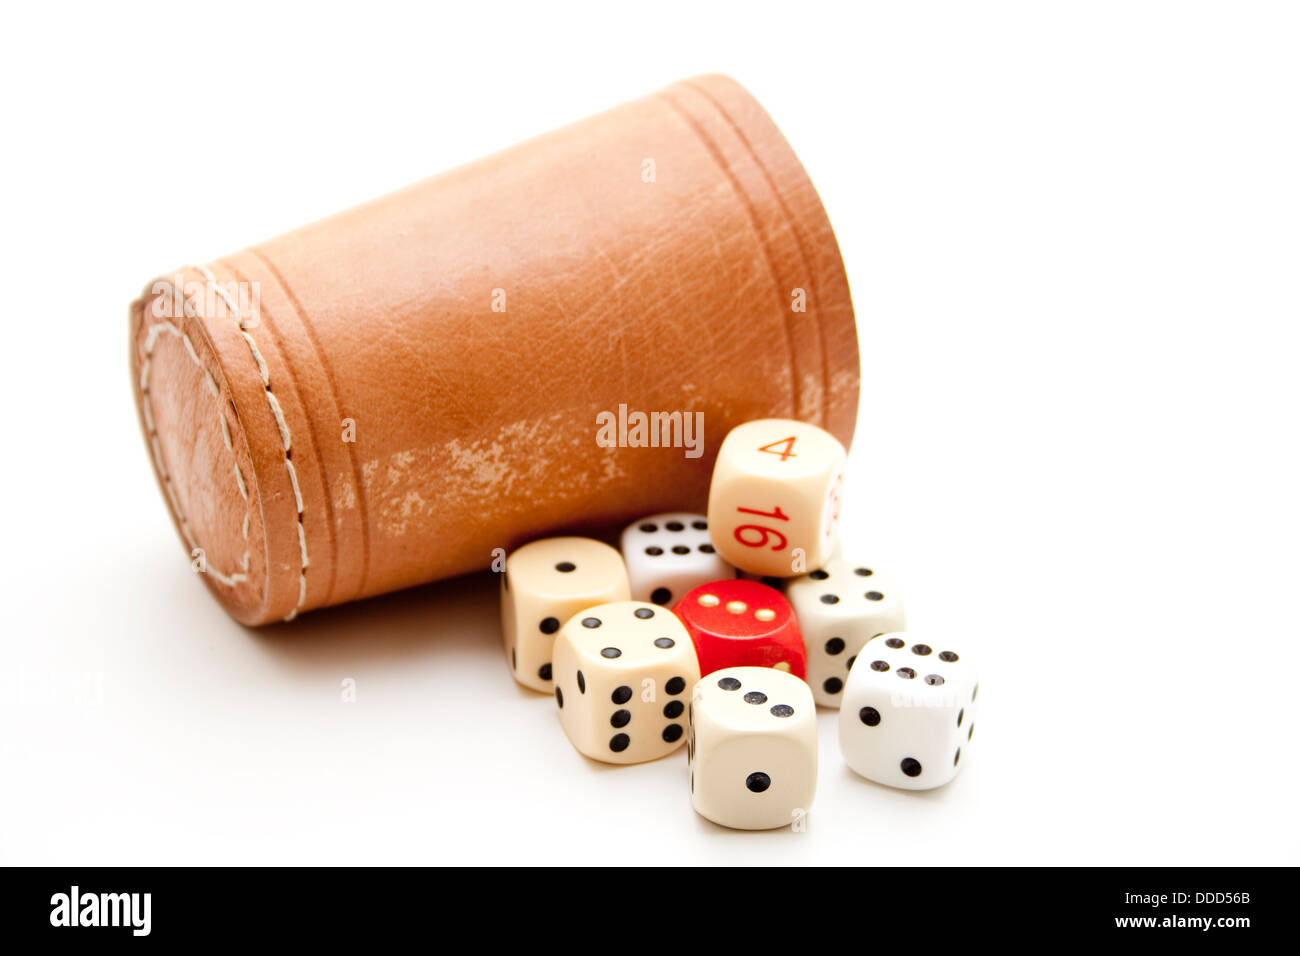 Dice cup Stock Photo